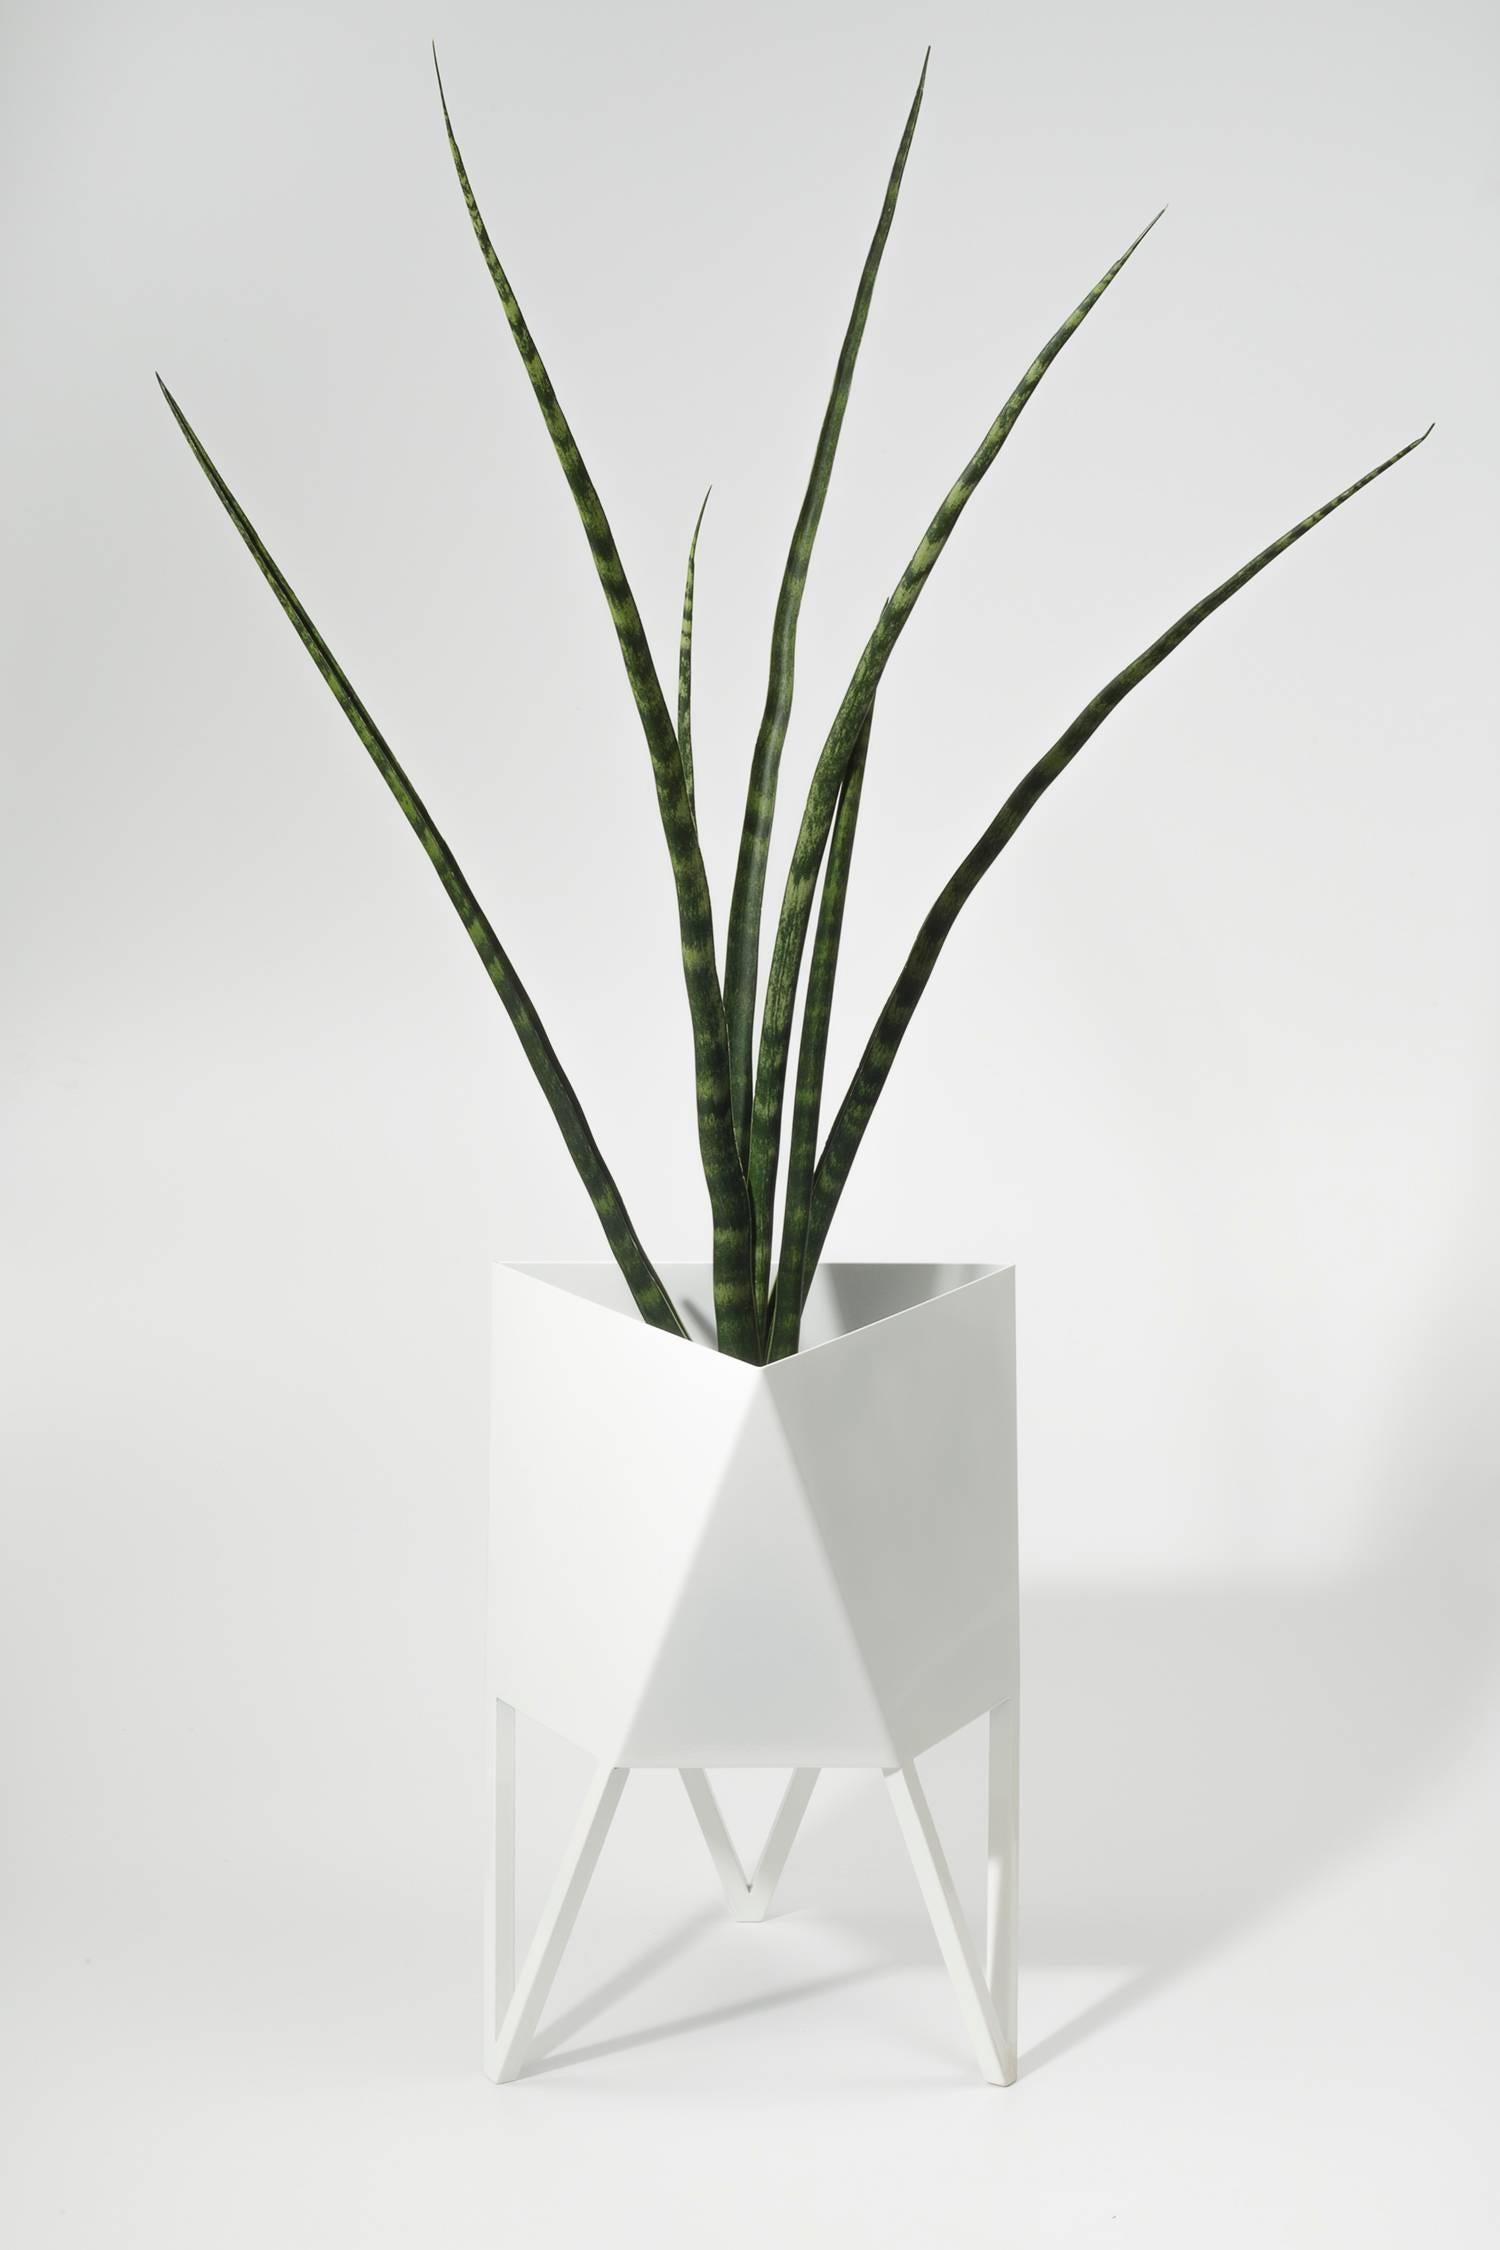 Introducing Force/Collide's signature planter in glossy white. Using a seamless brake-forming technique, one sheet of steel is wrapped into a unique geometric pattern that's triangular at the top and hexagonal at the base. Three V-shaped legs